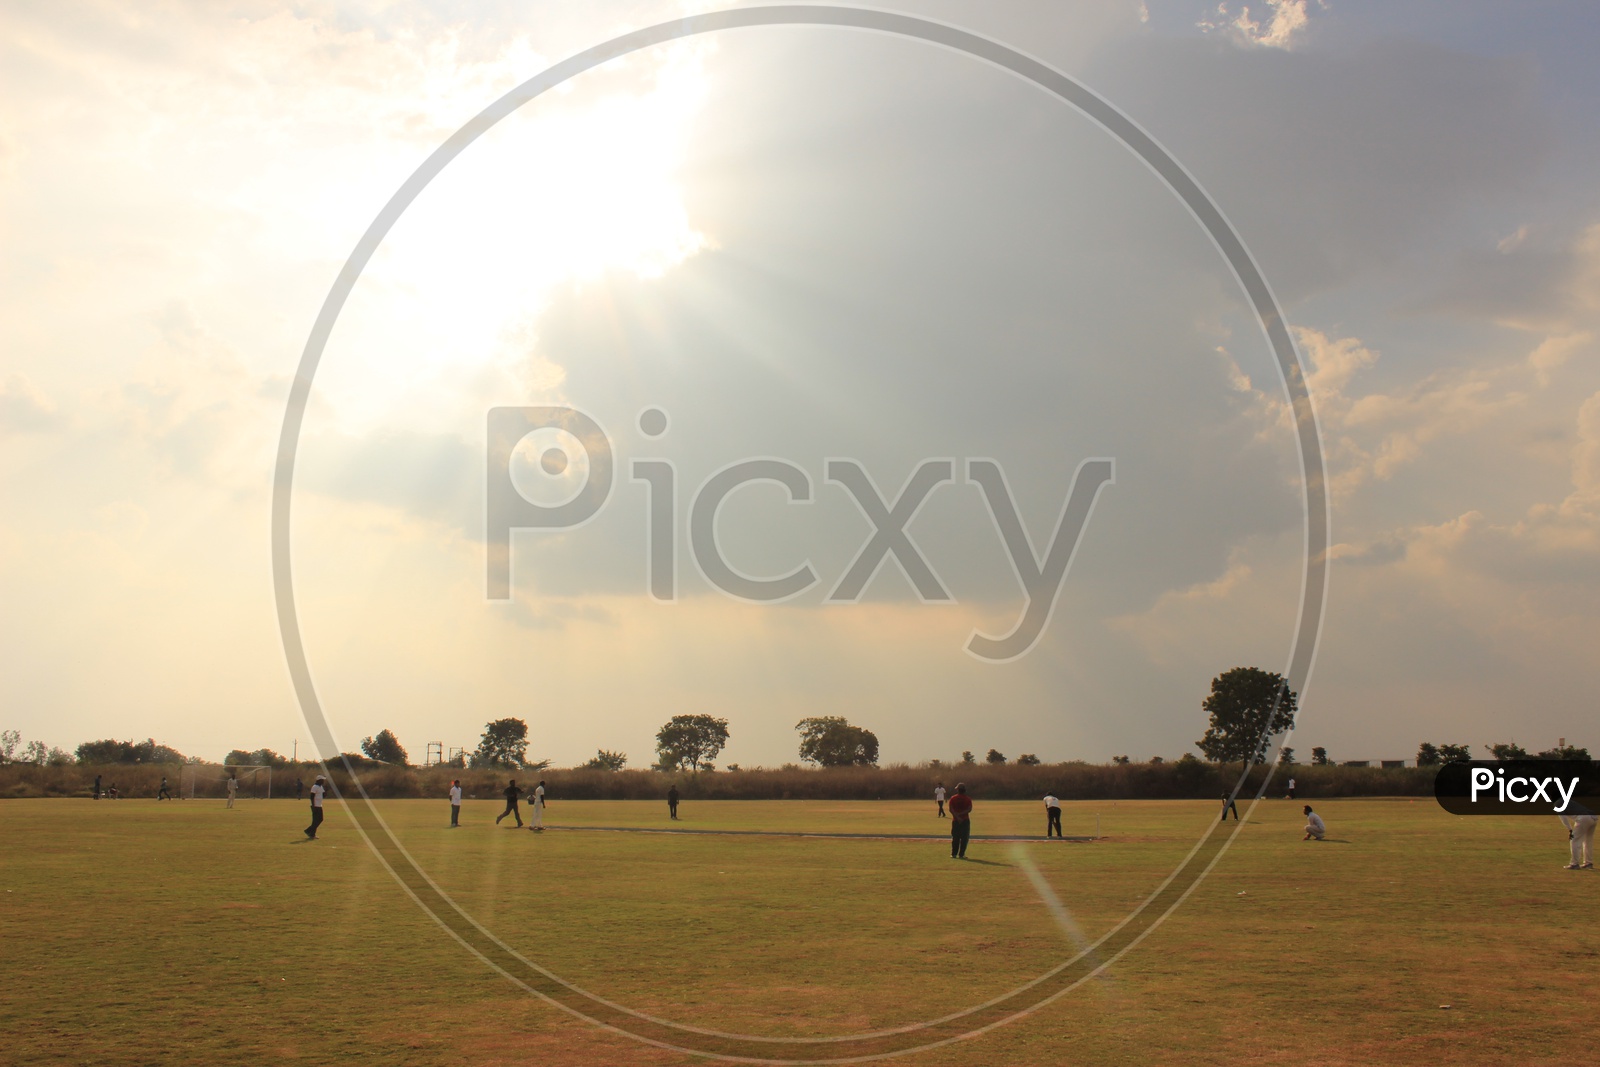 Indian Men Playing Cricket in a College Ground